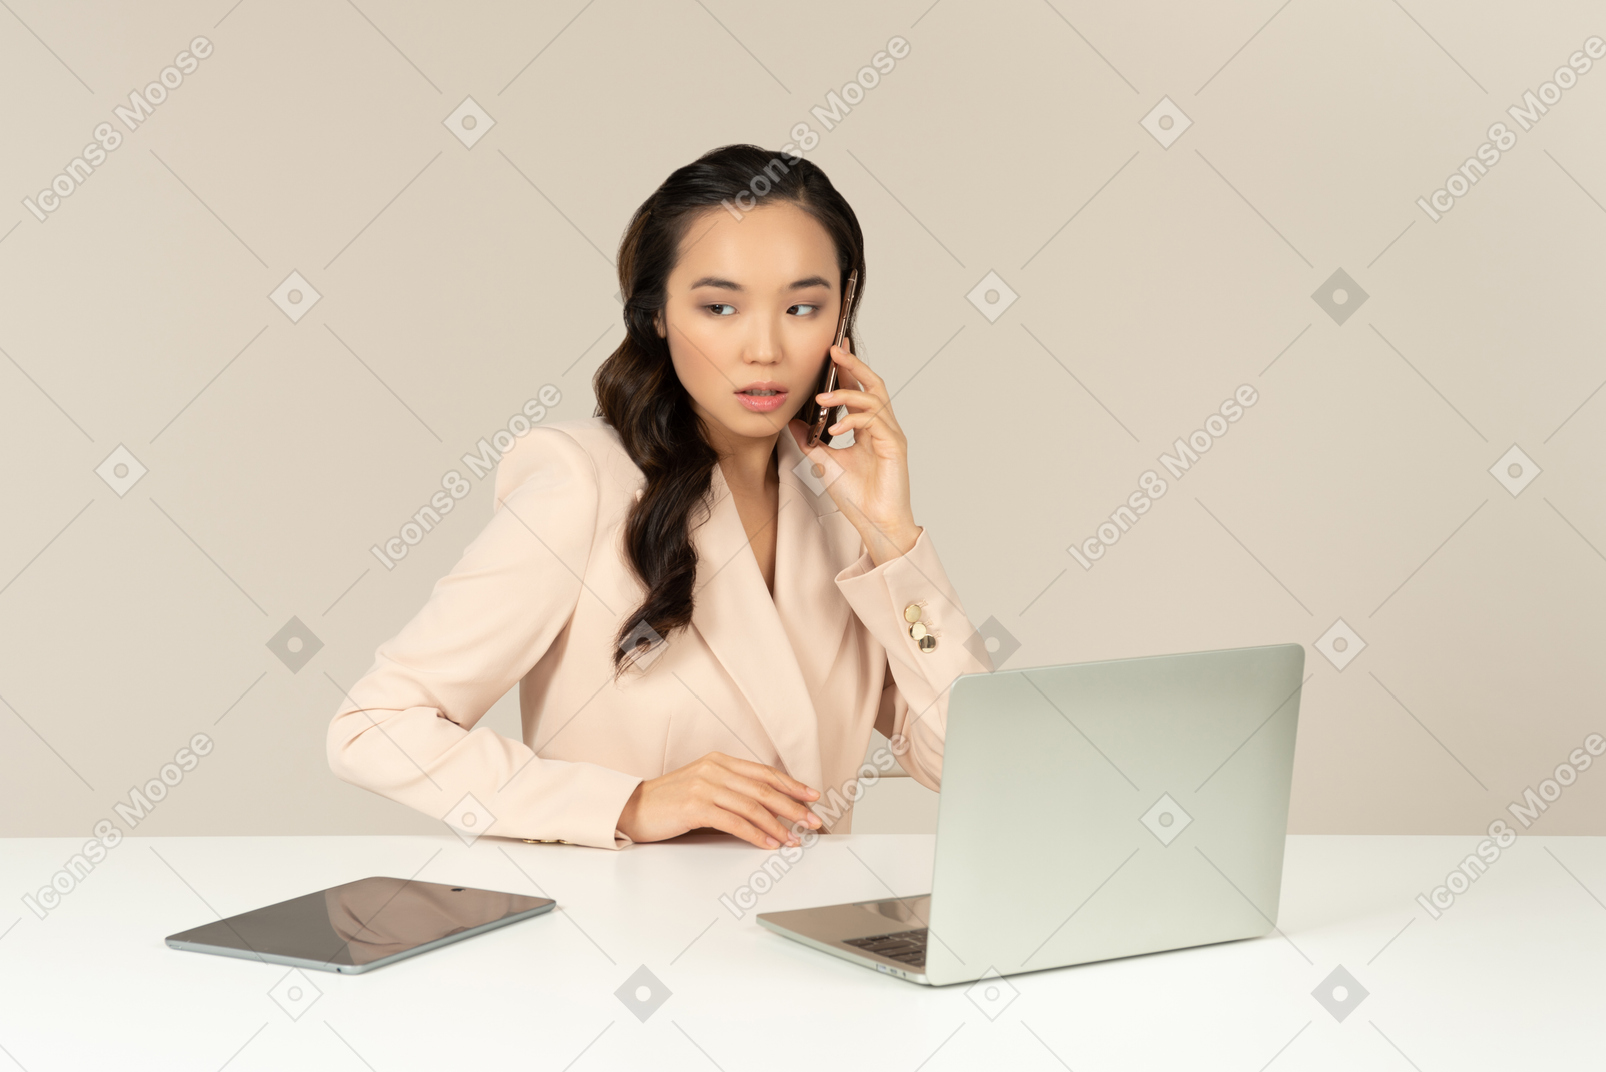 Asian office employee involved in phone conversation